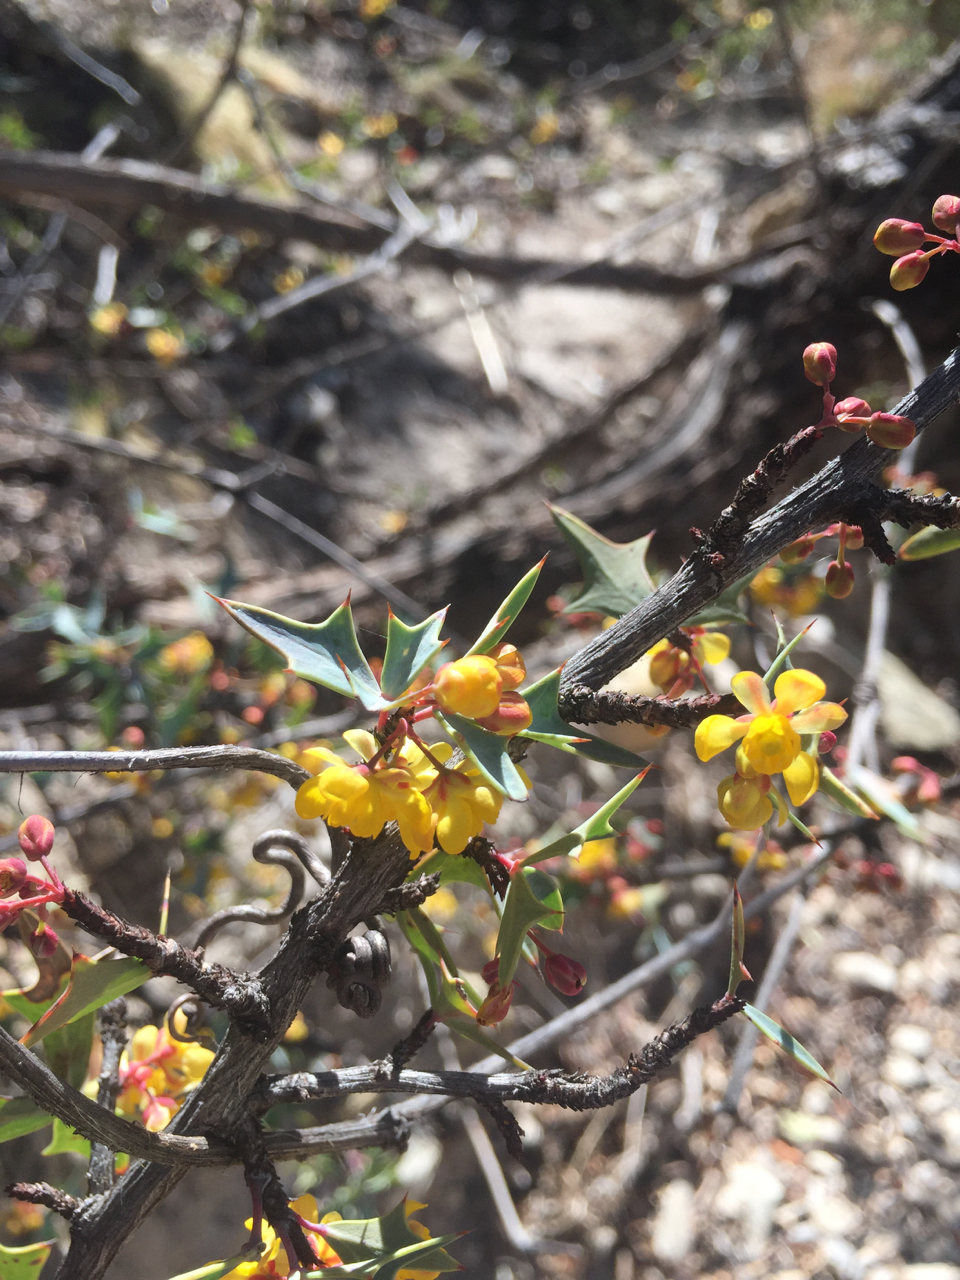 yellow flowers, green holly-like leaves on a branch